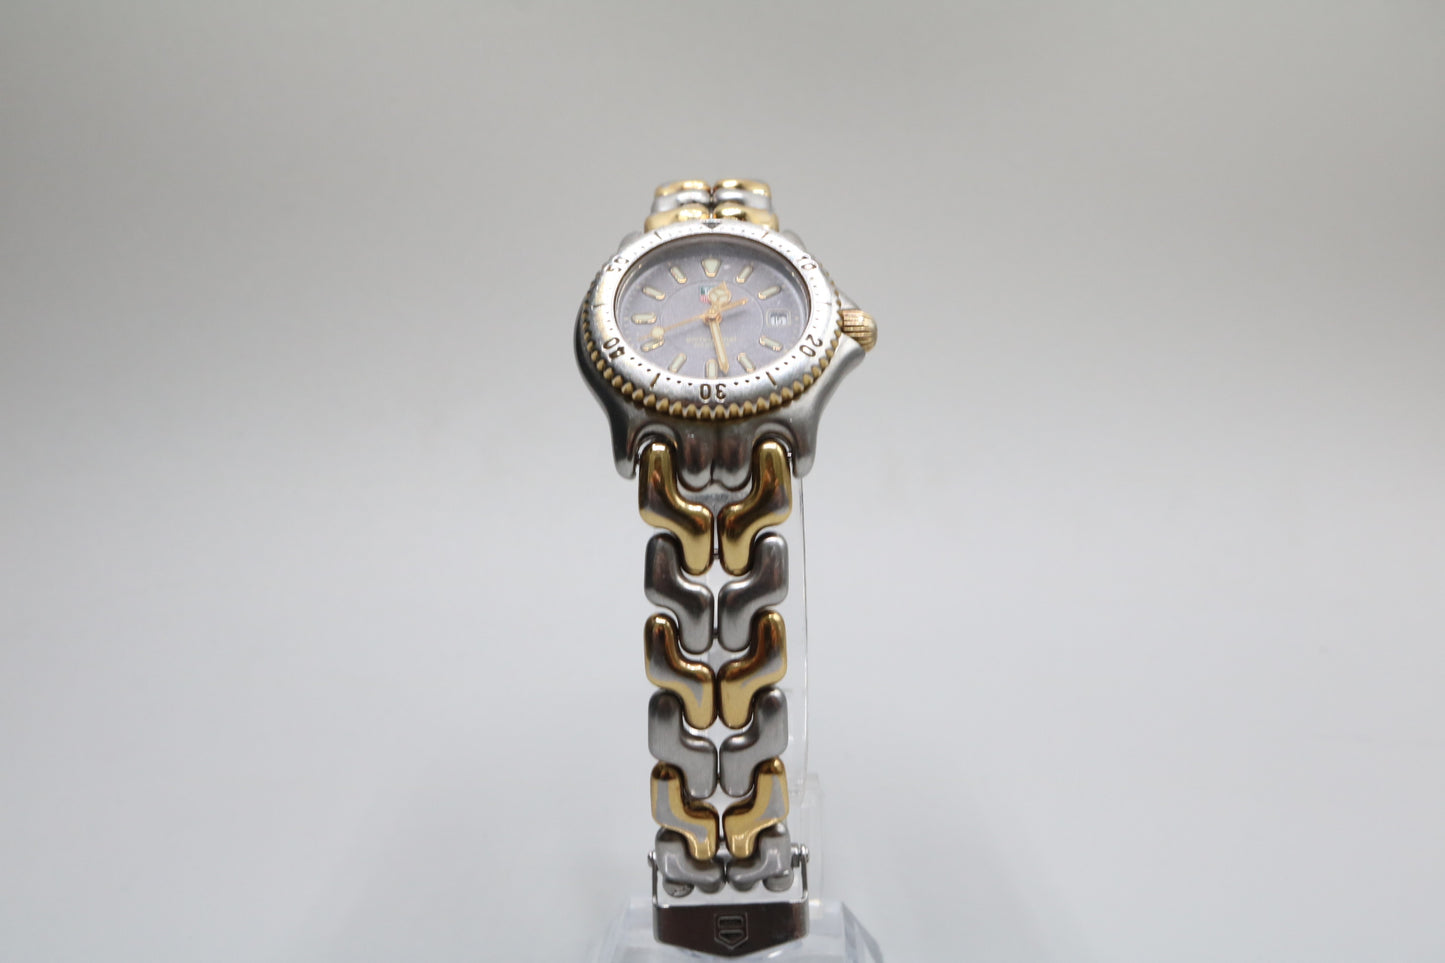 Tag Heuer Gray Gold Plated Stainless Steel Professional WG1320-0